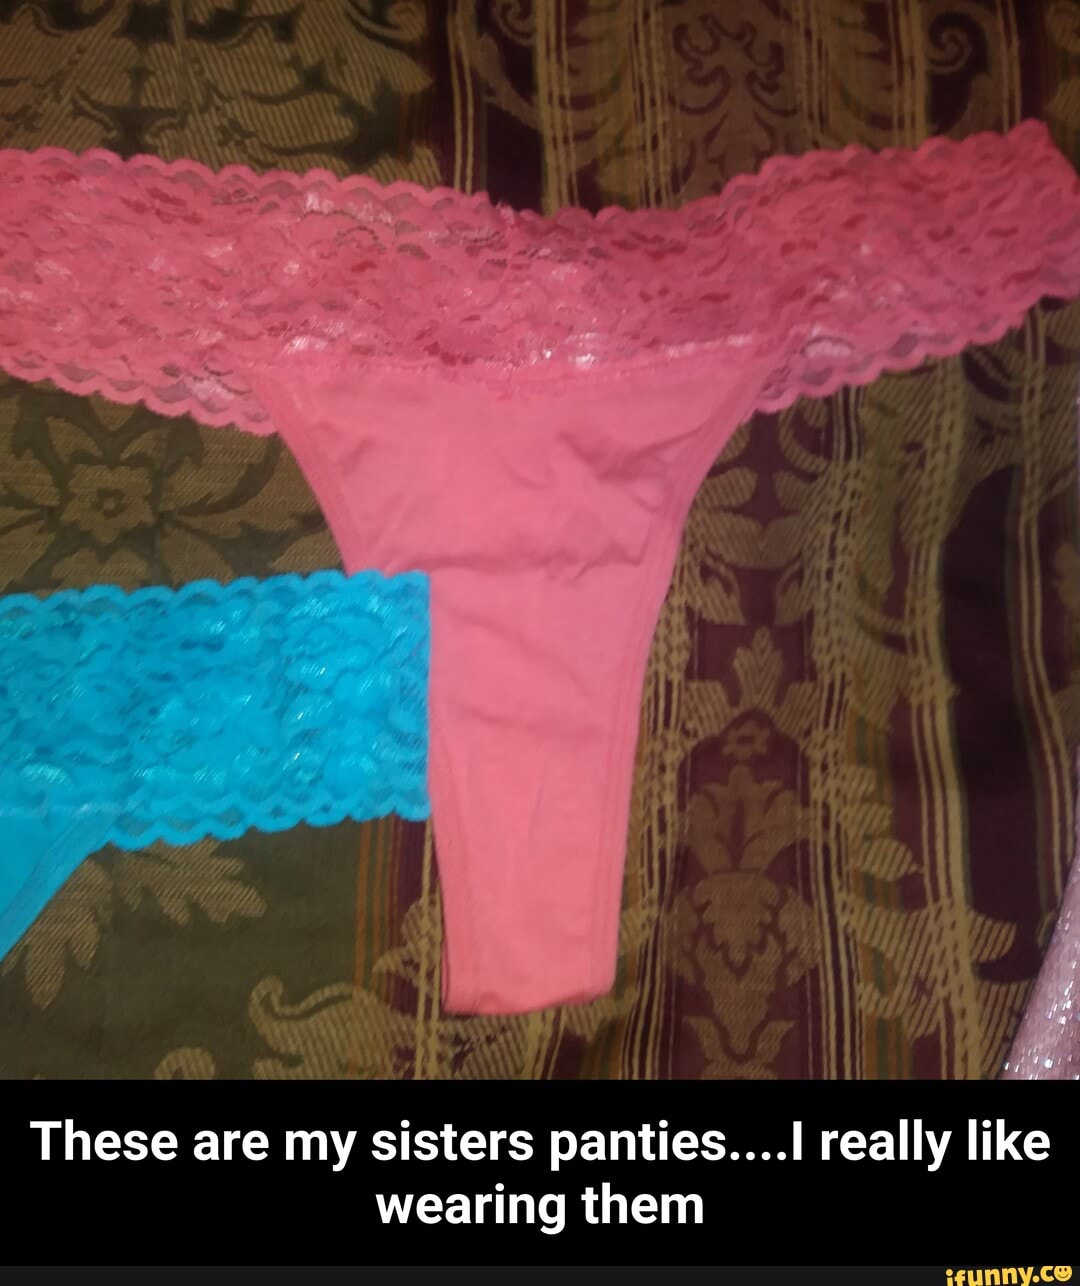 Eally like r These are my sisters panties.l them wearing